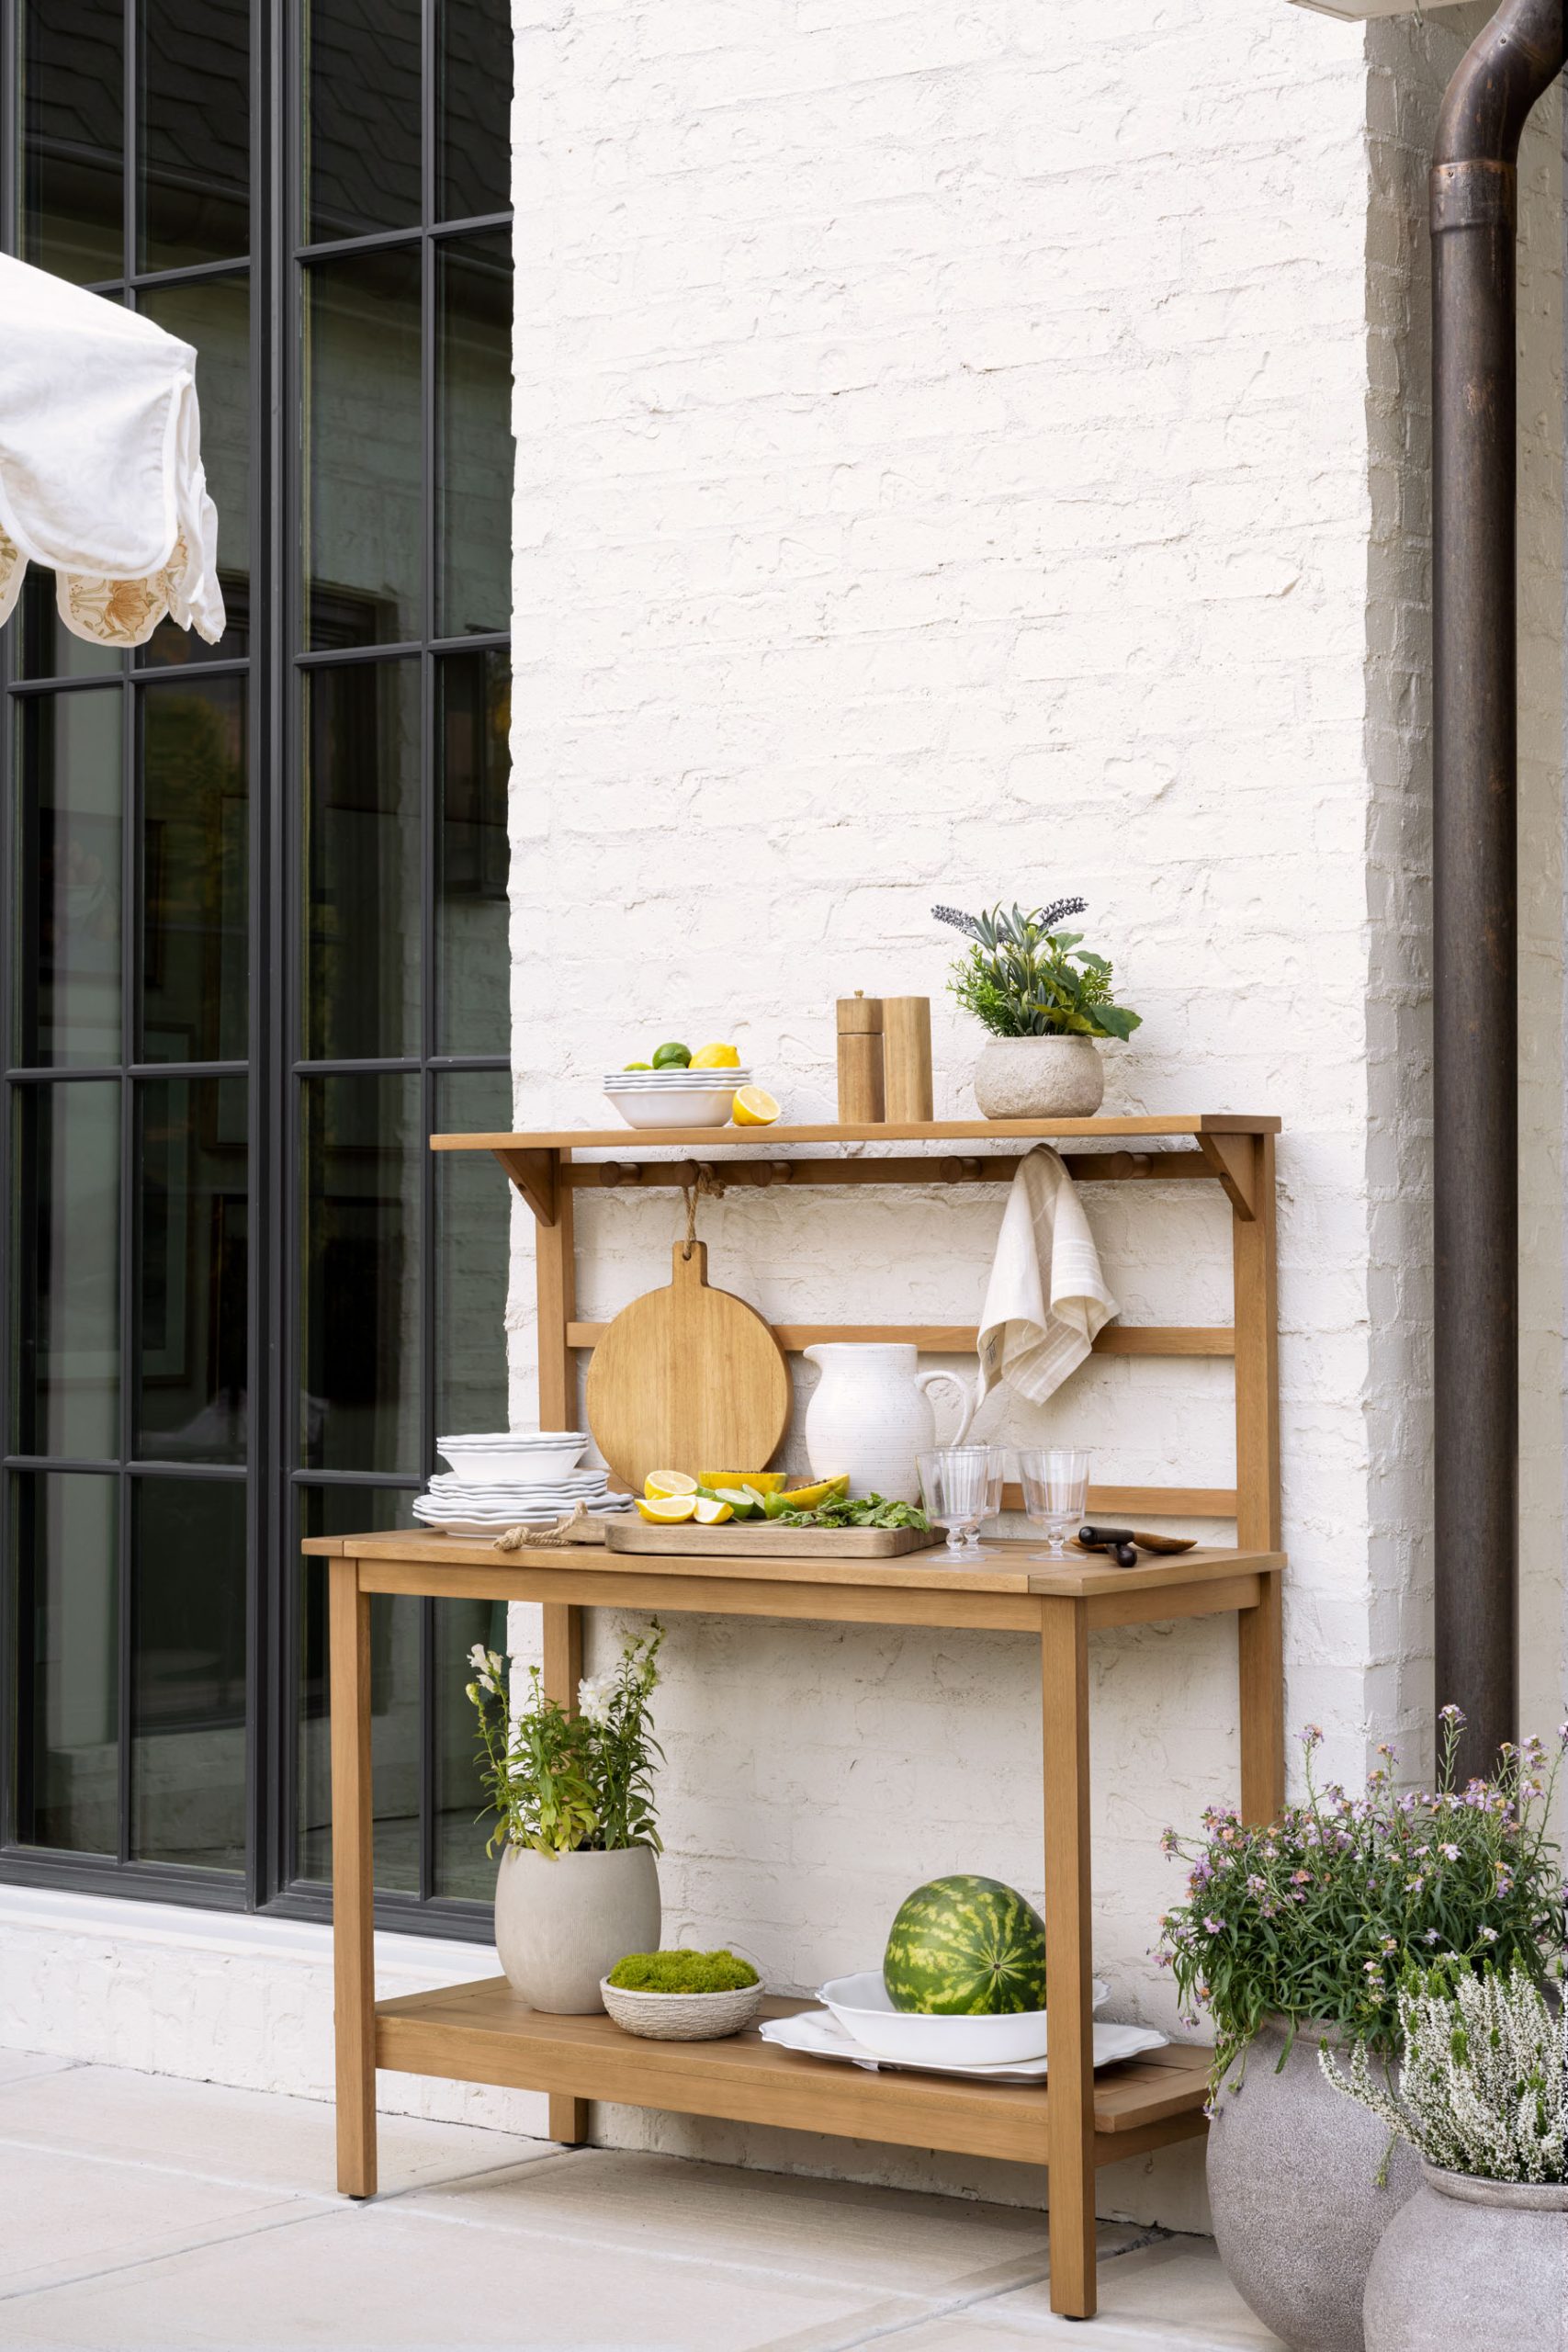 Wood hutch with outdoor dining essentials